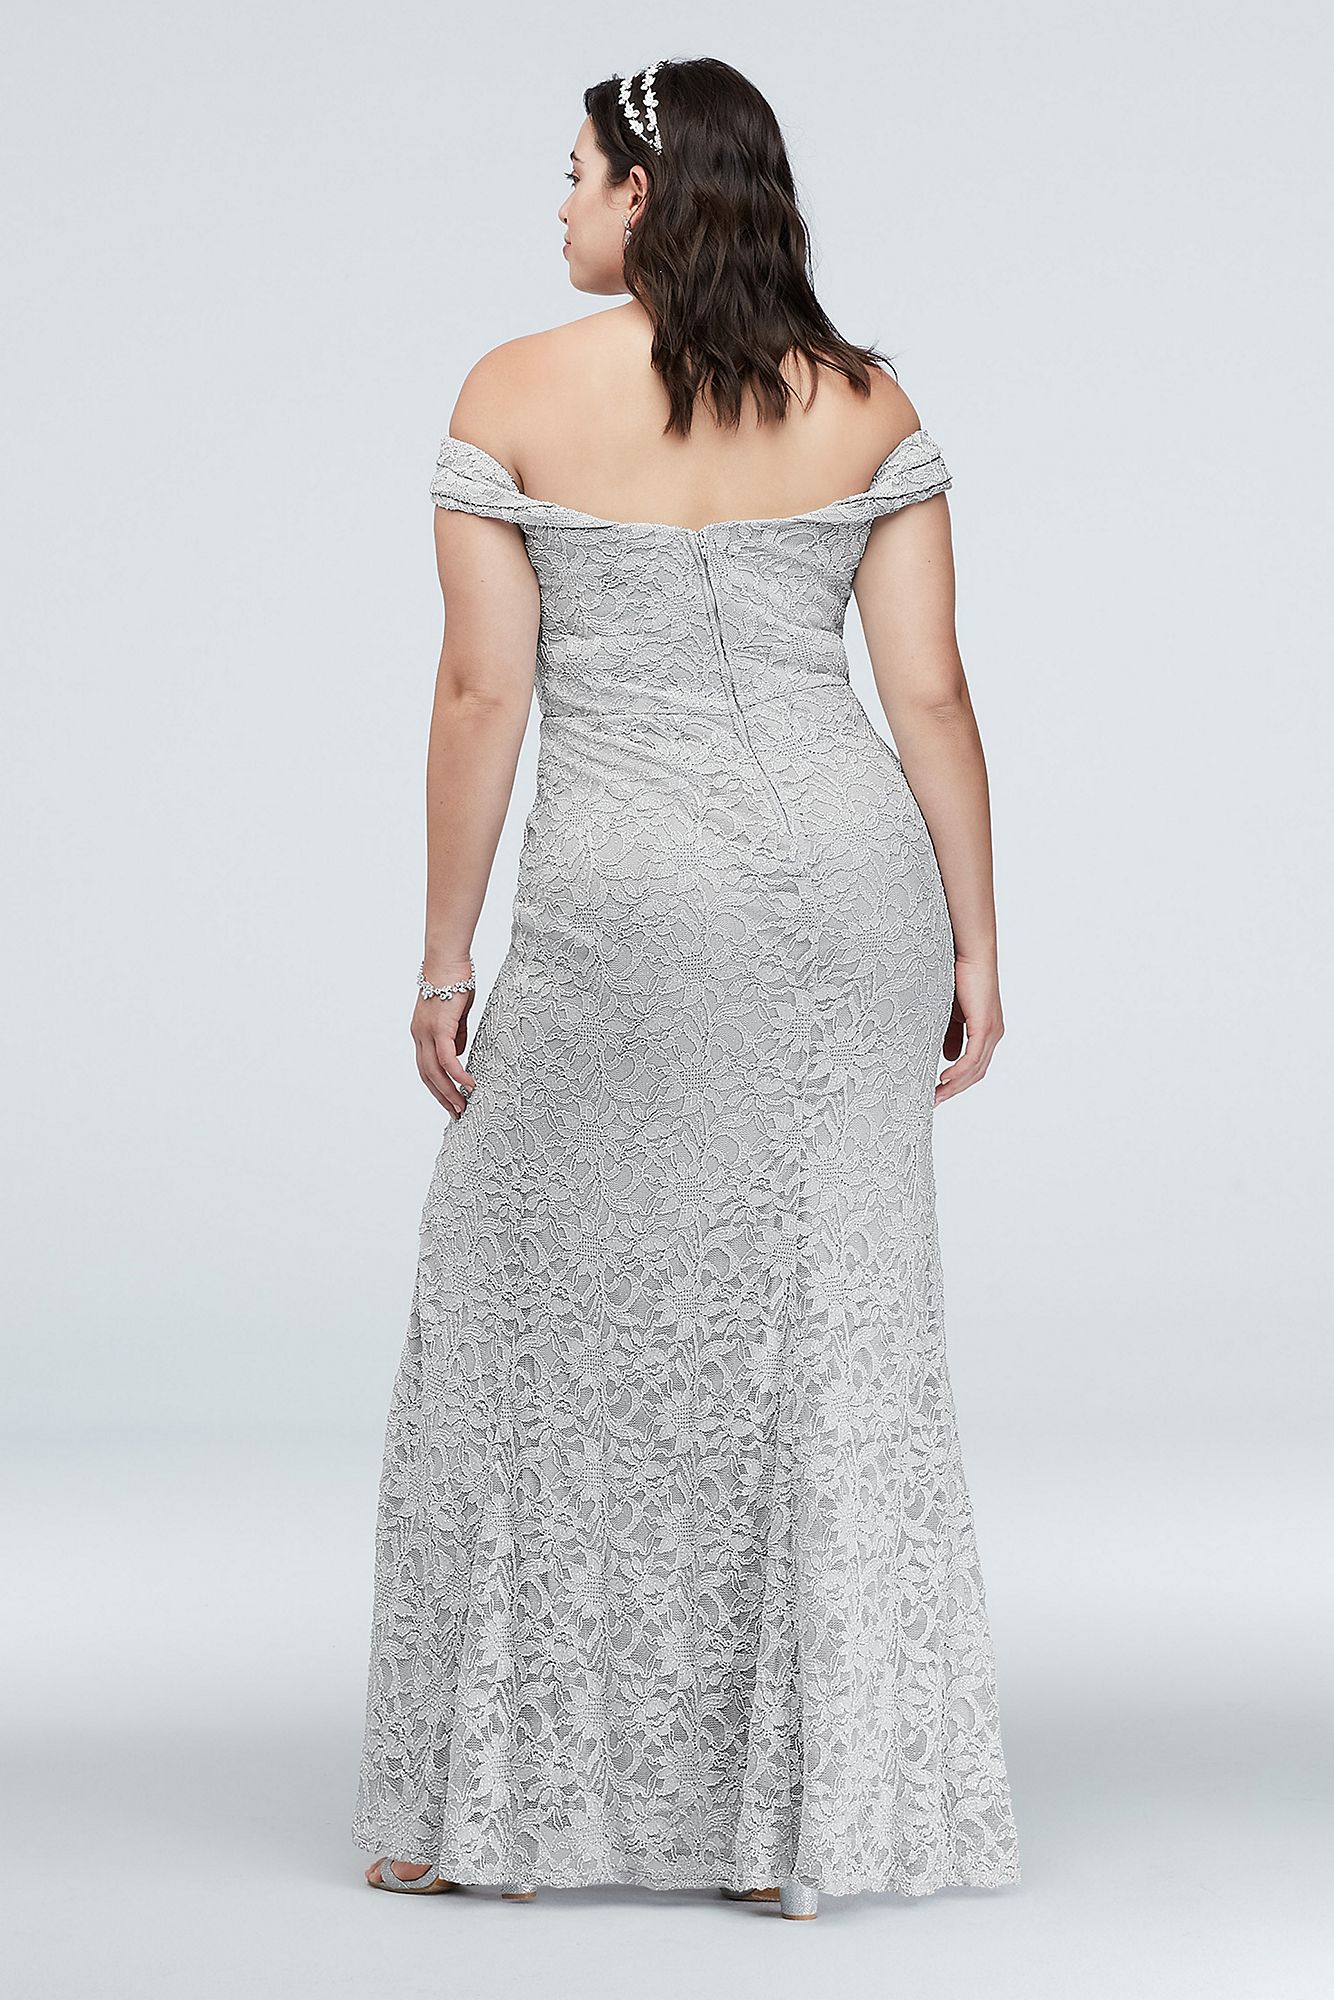 Plus Size 3622BE4W Style Off-the-Shoulder Metallic Lace Dress